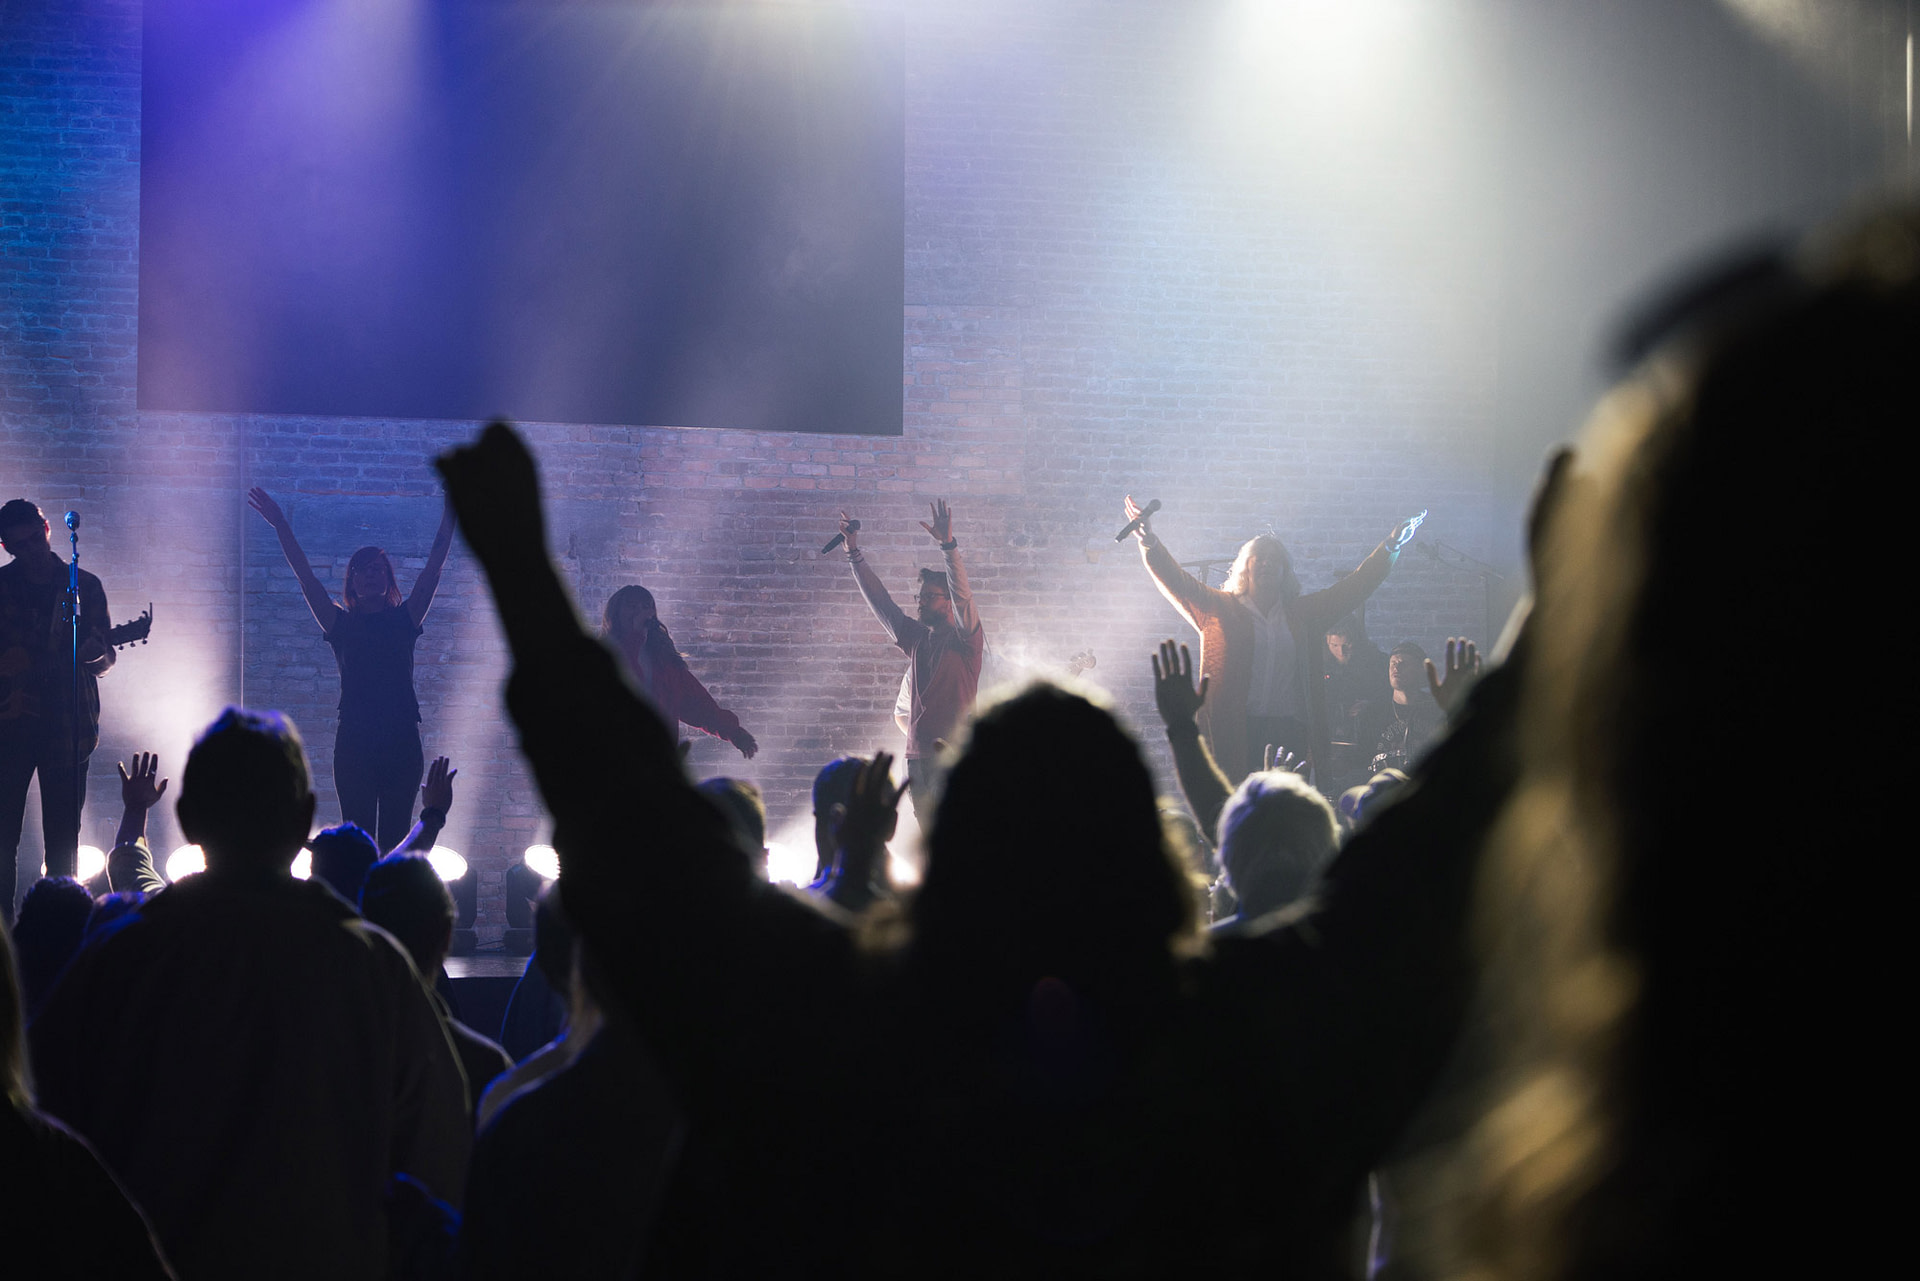 Worshipers with their hands raised at a concert